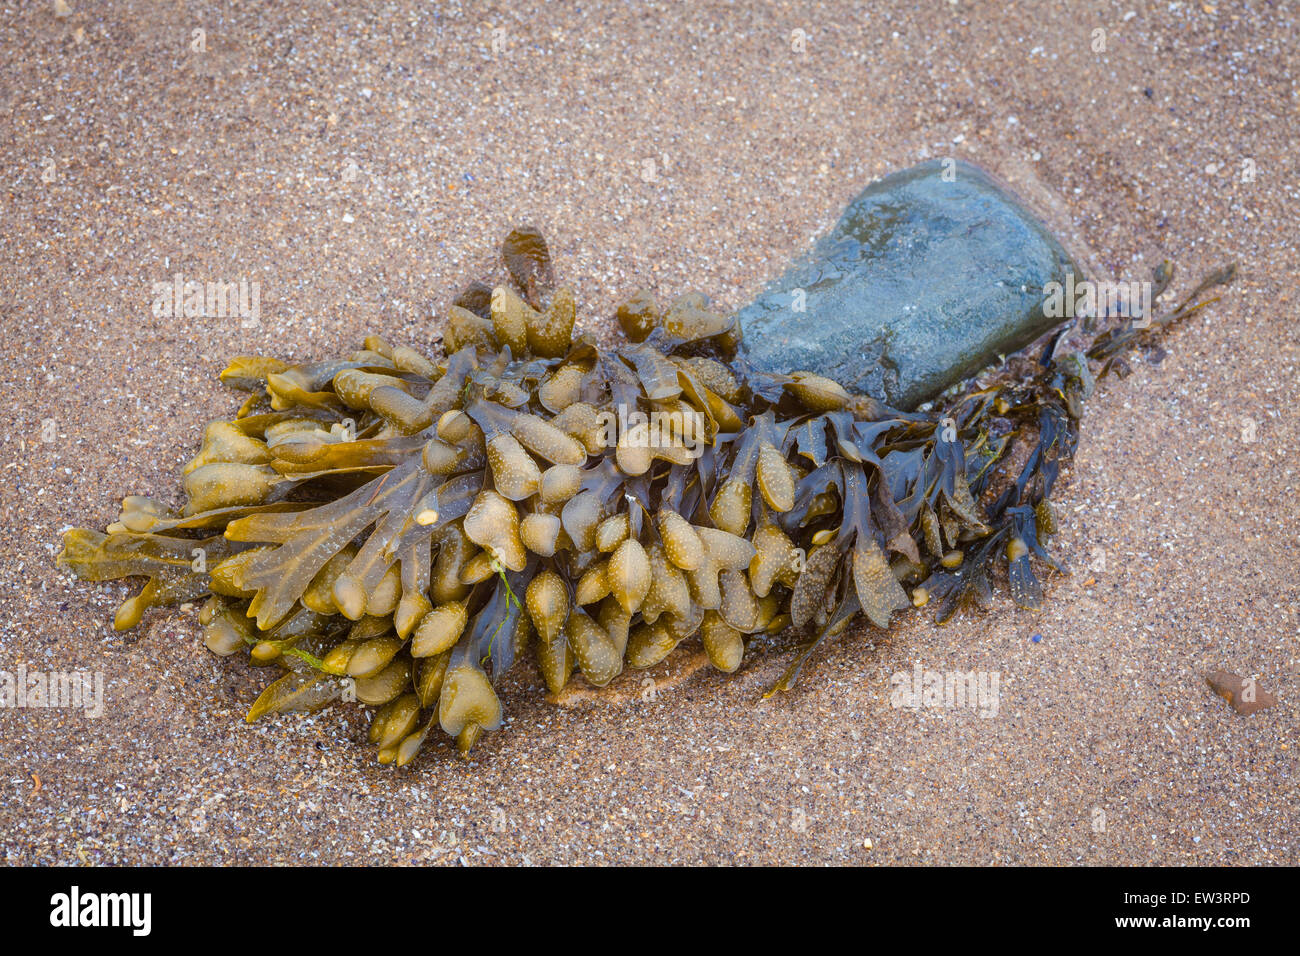 Bladder wrack seaweed attached to small rock on a sandy beach Stock Photo